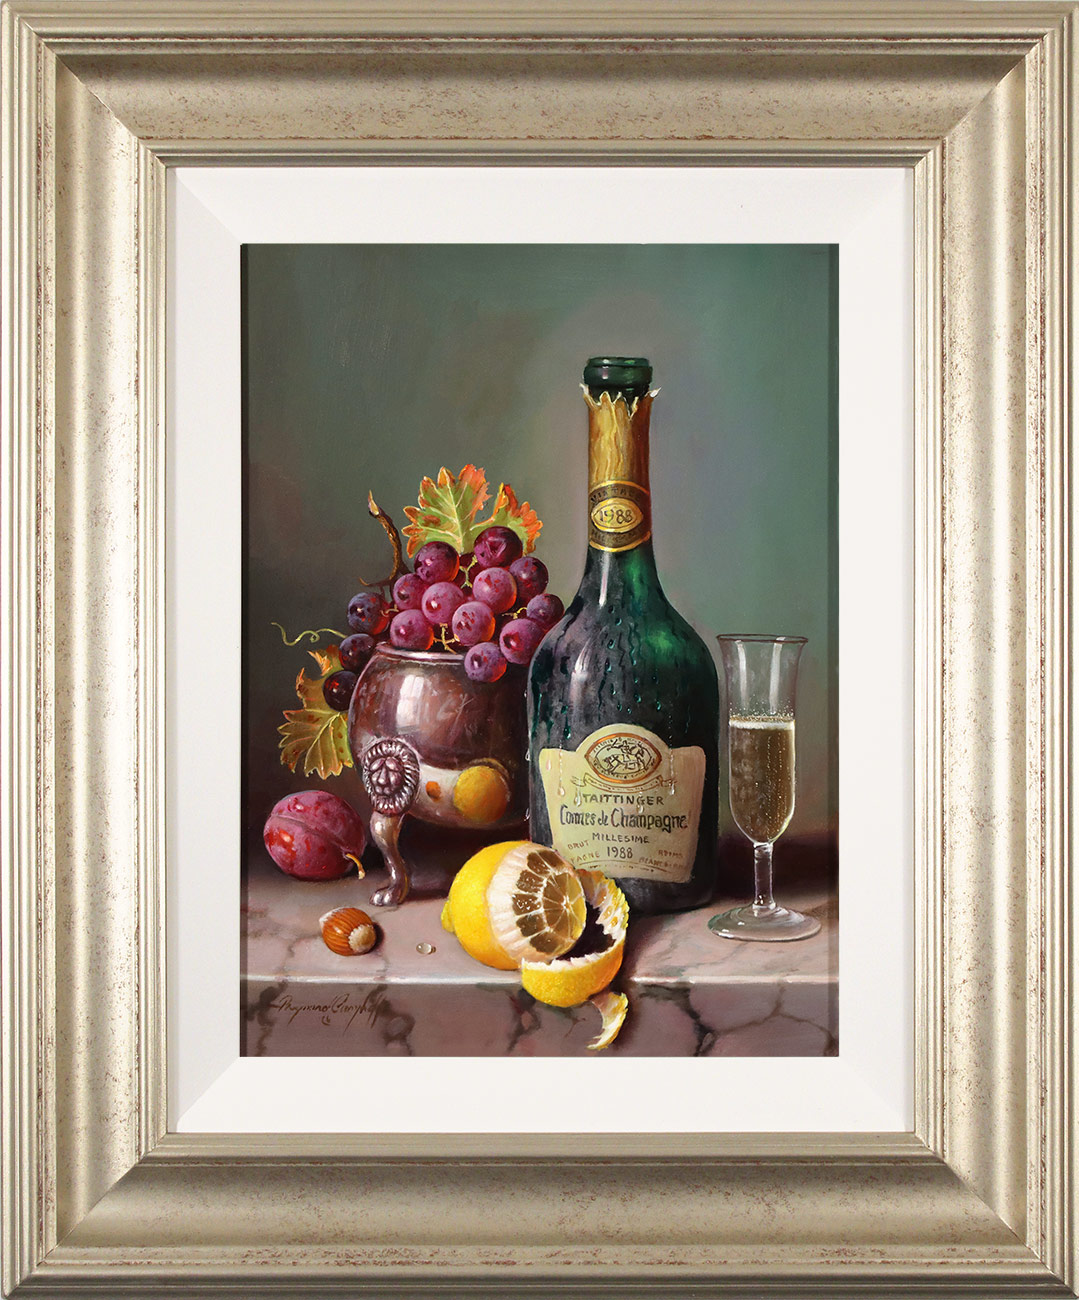 Raymond Campbell, Original oil painting on panel, Chilled Taittinger, 1988 Vintage Champagne. Click to enlarge